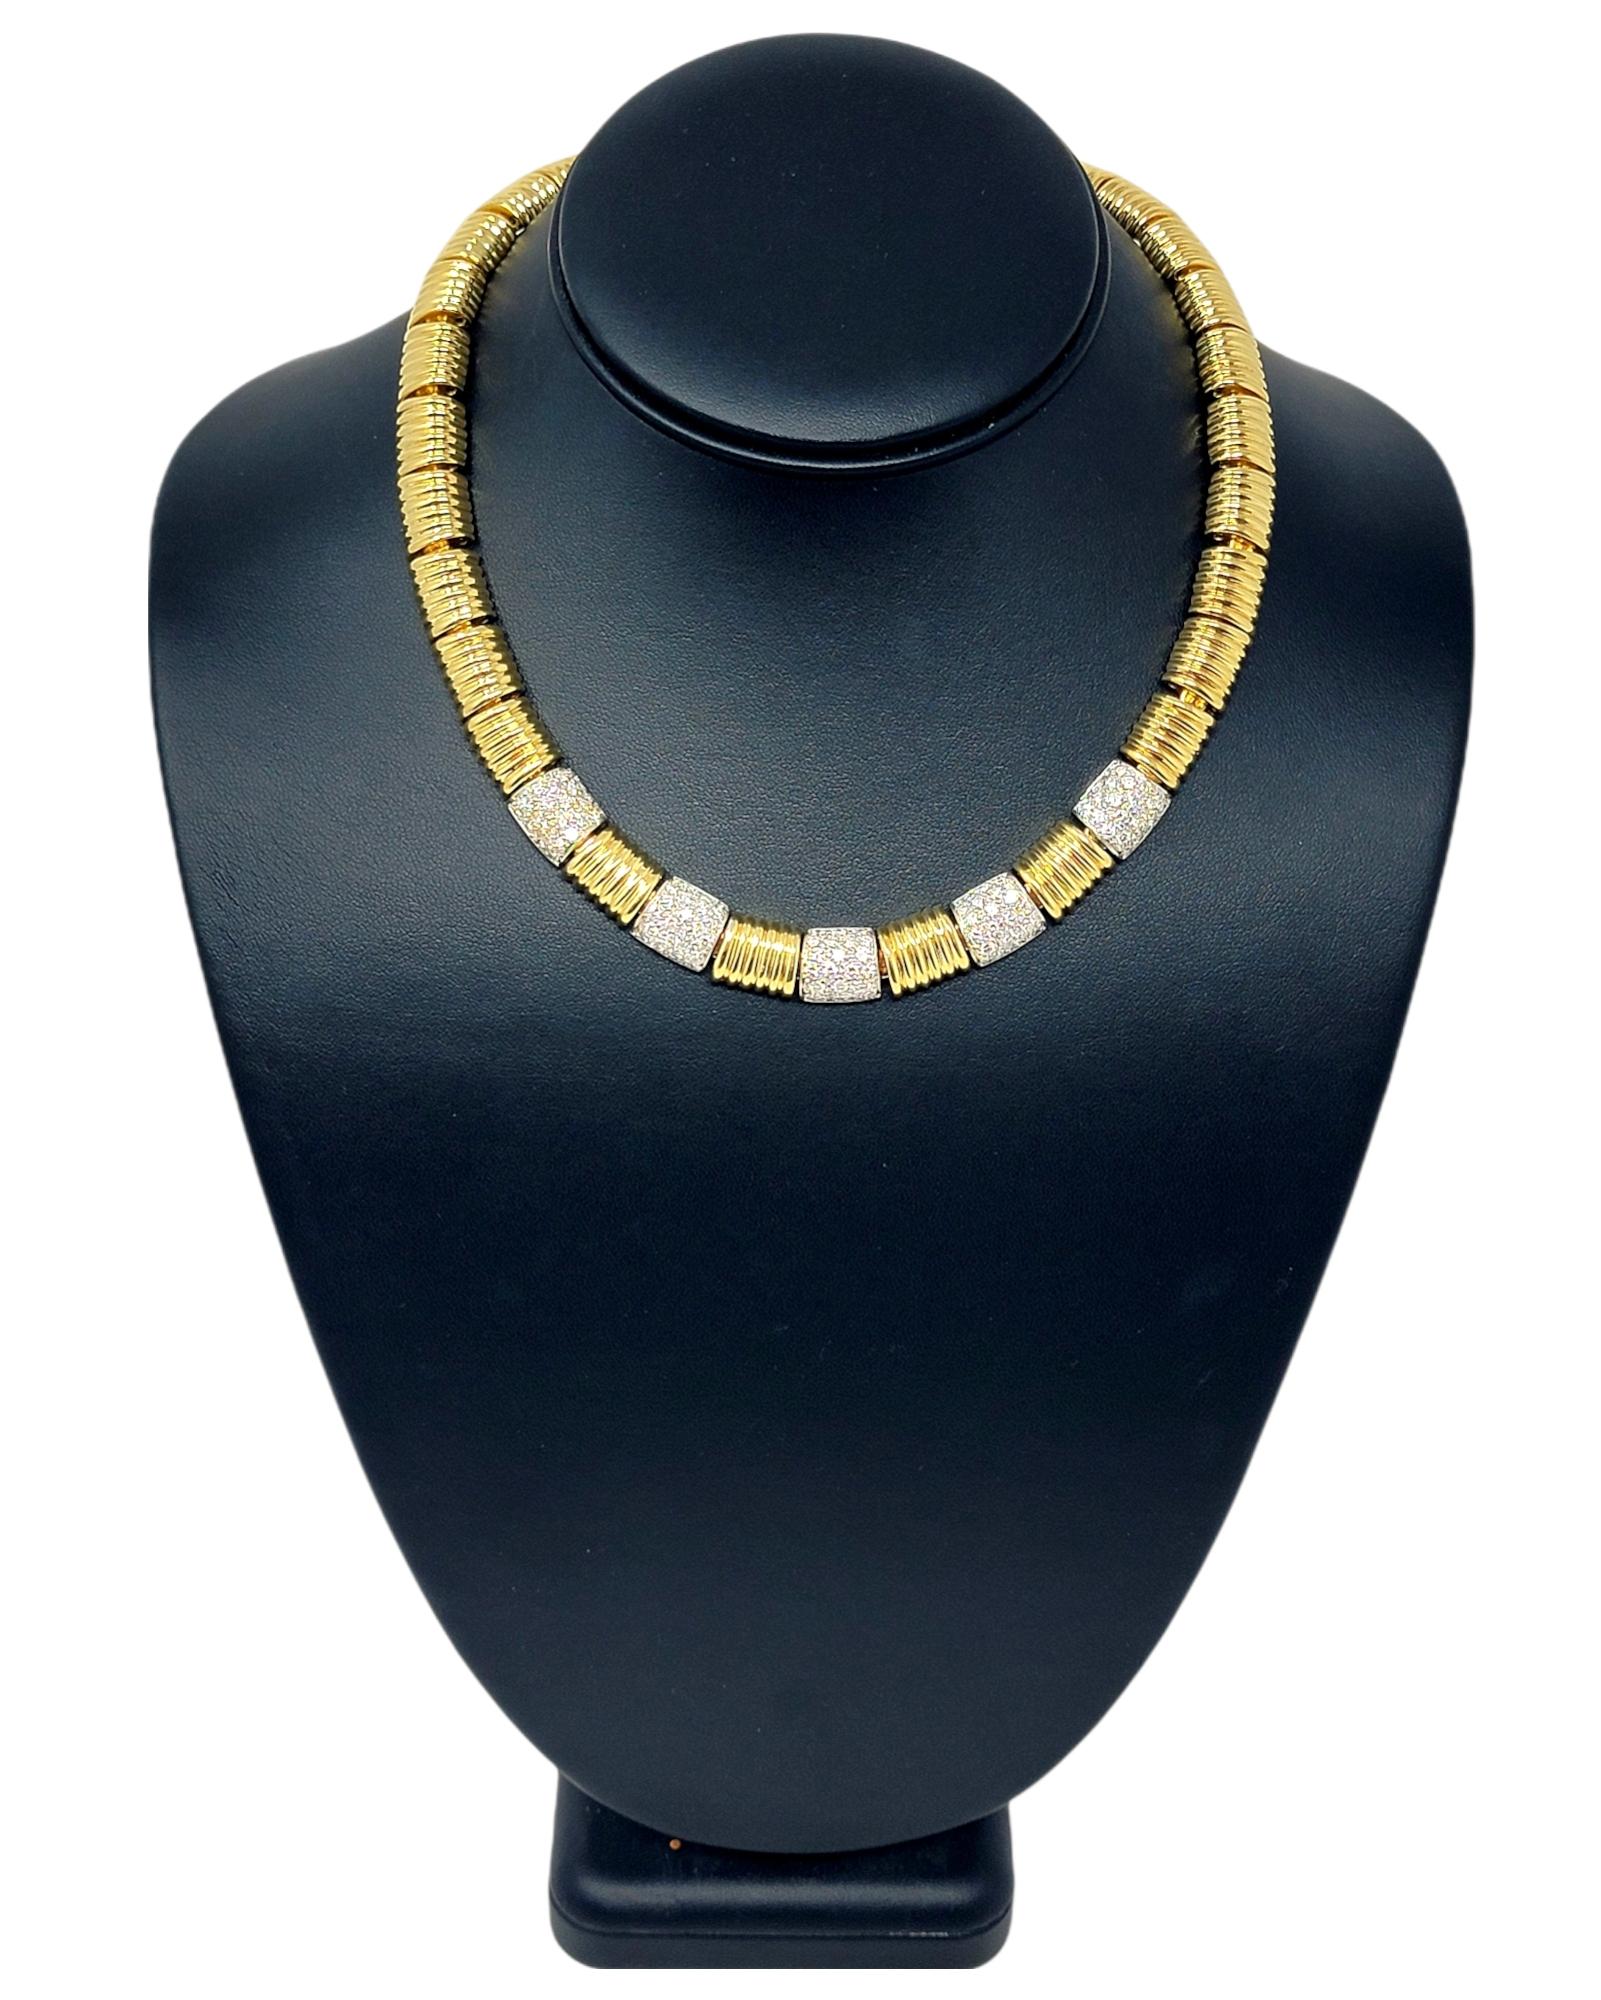 18 Karat Yellow and White Gold Ridged Link Choker Necklace with Pave Diamonds For Sale 6